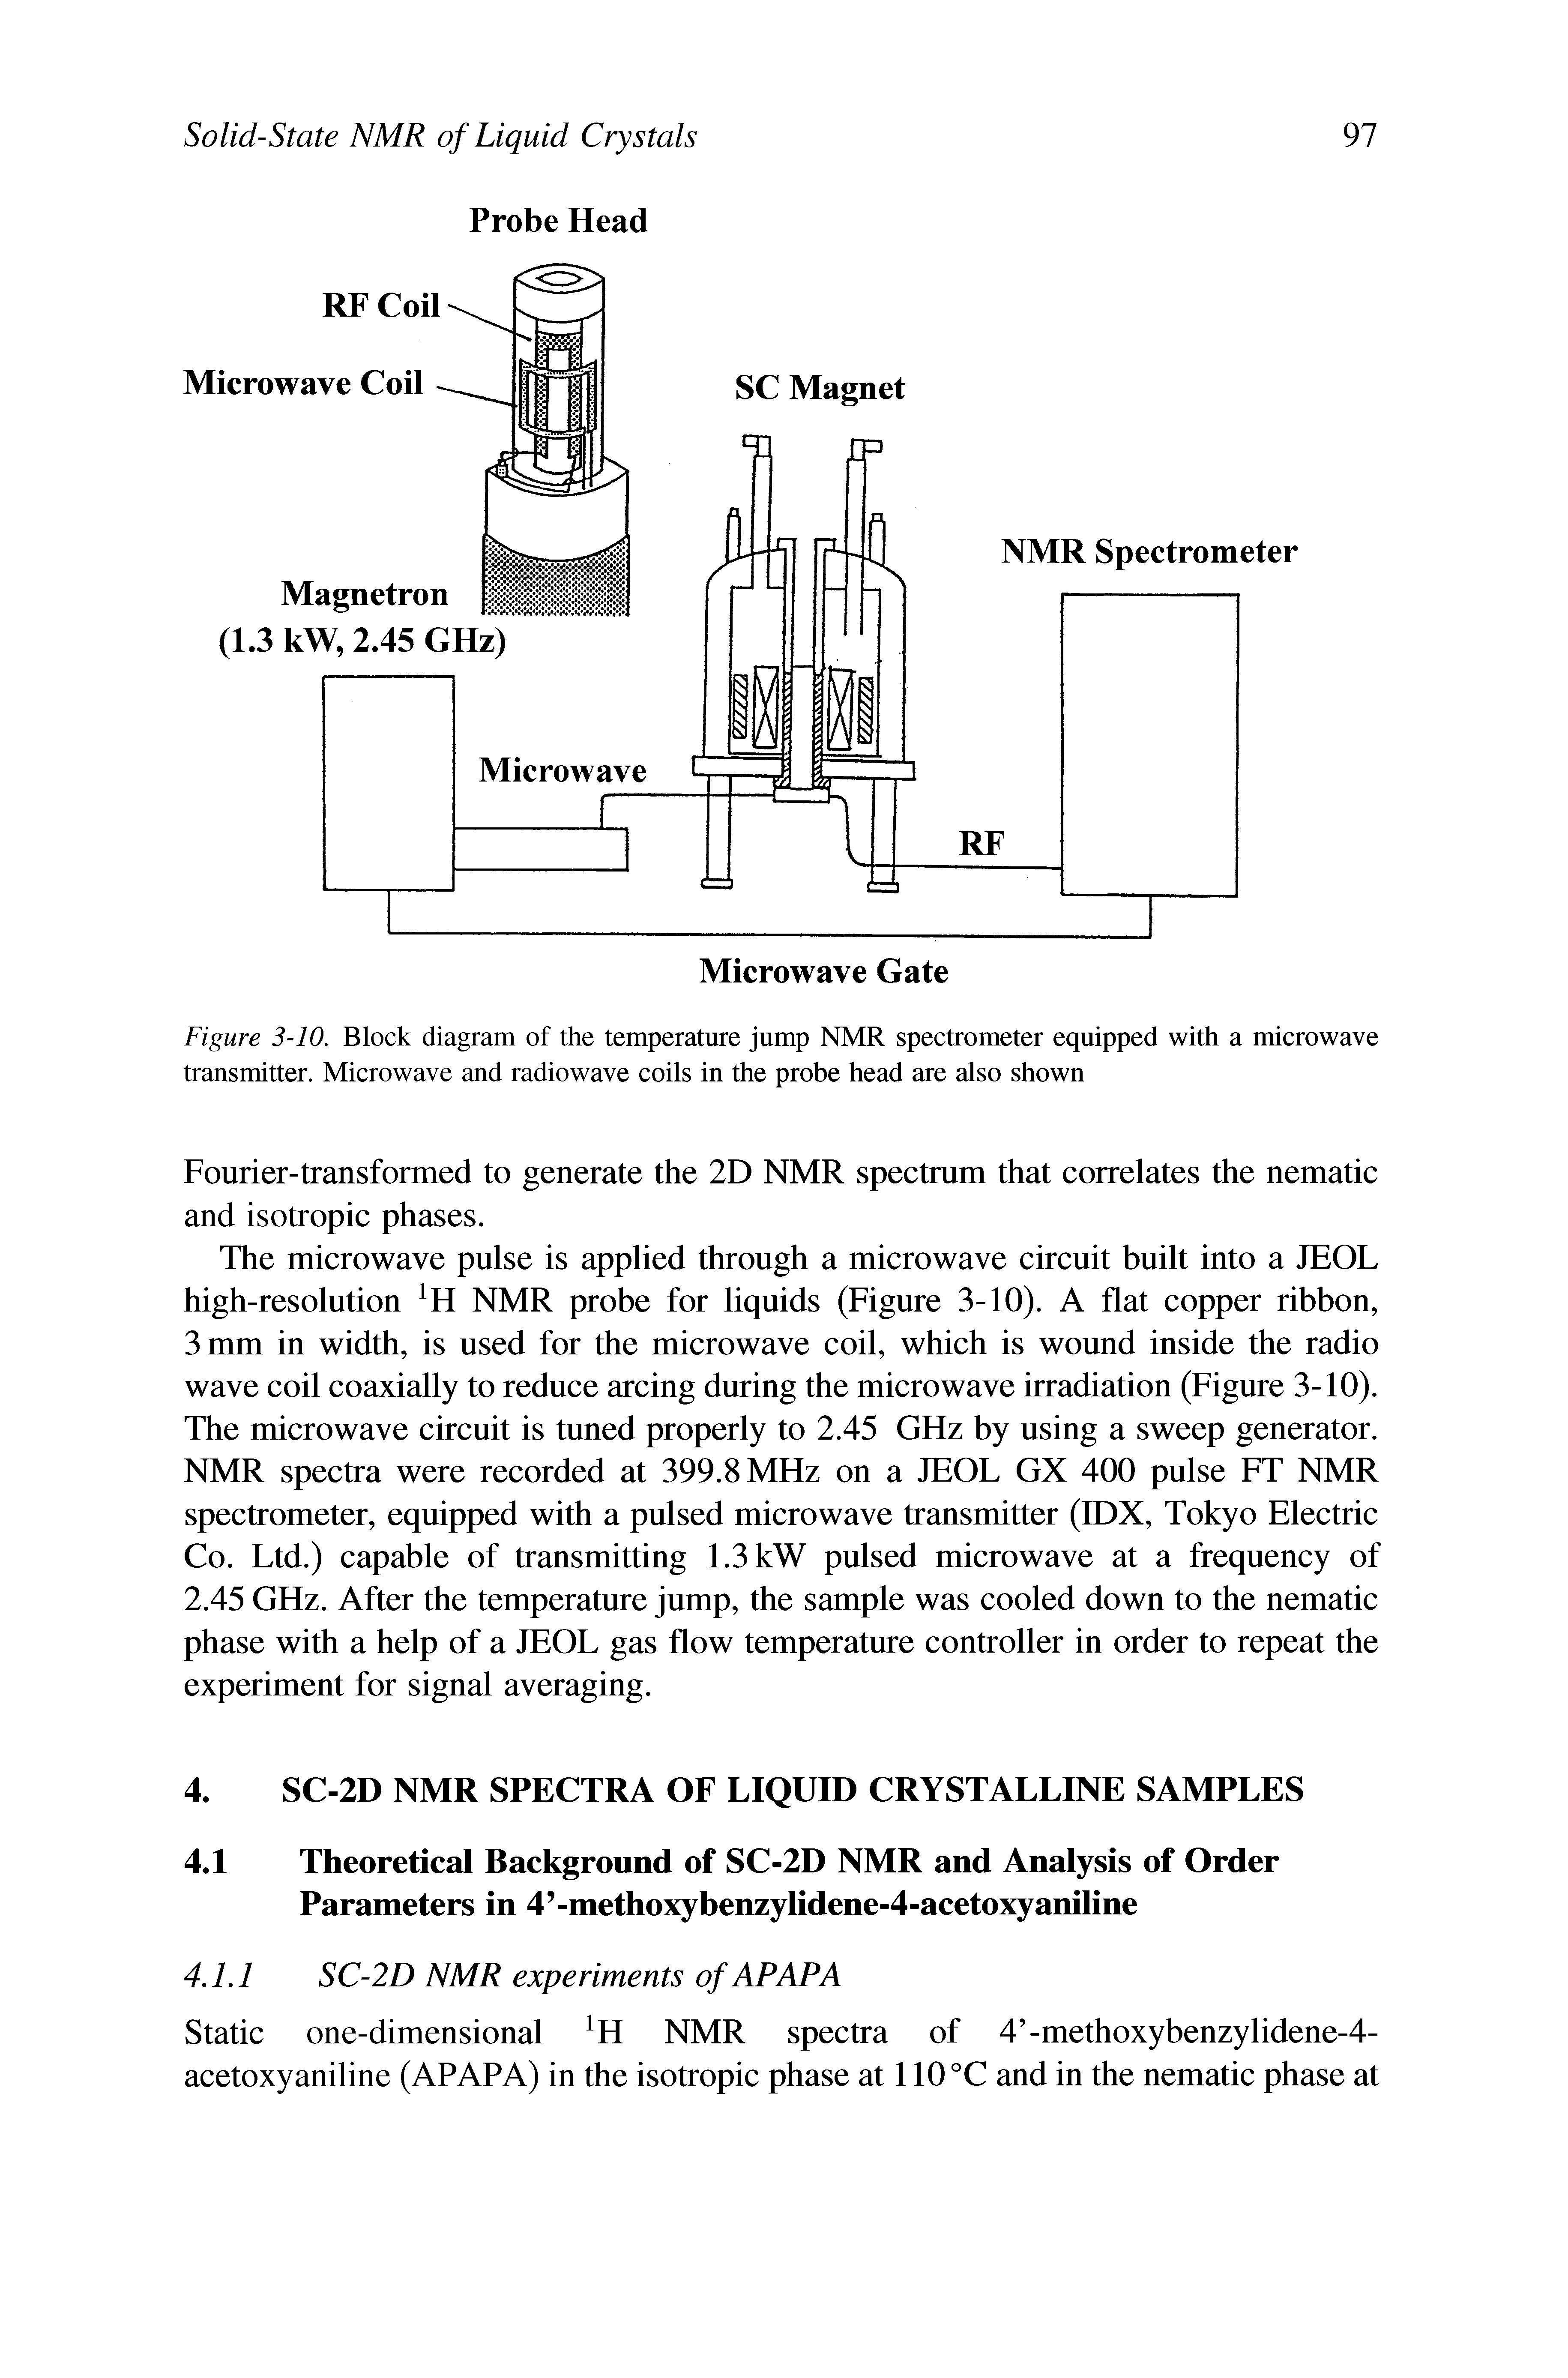 Figure 3-10. Block diagram of the temperature jump NMR spectrometer equipped with a microwave transmitter. Microwave and radiowave coils in the probe head are also shown...